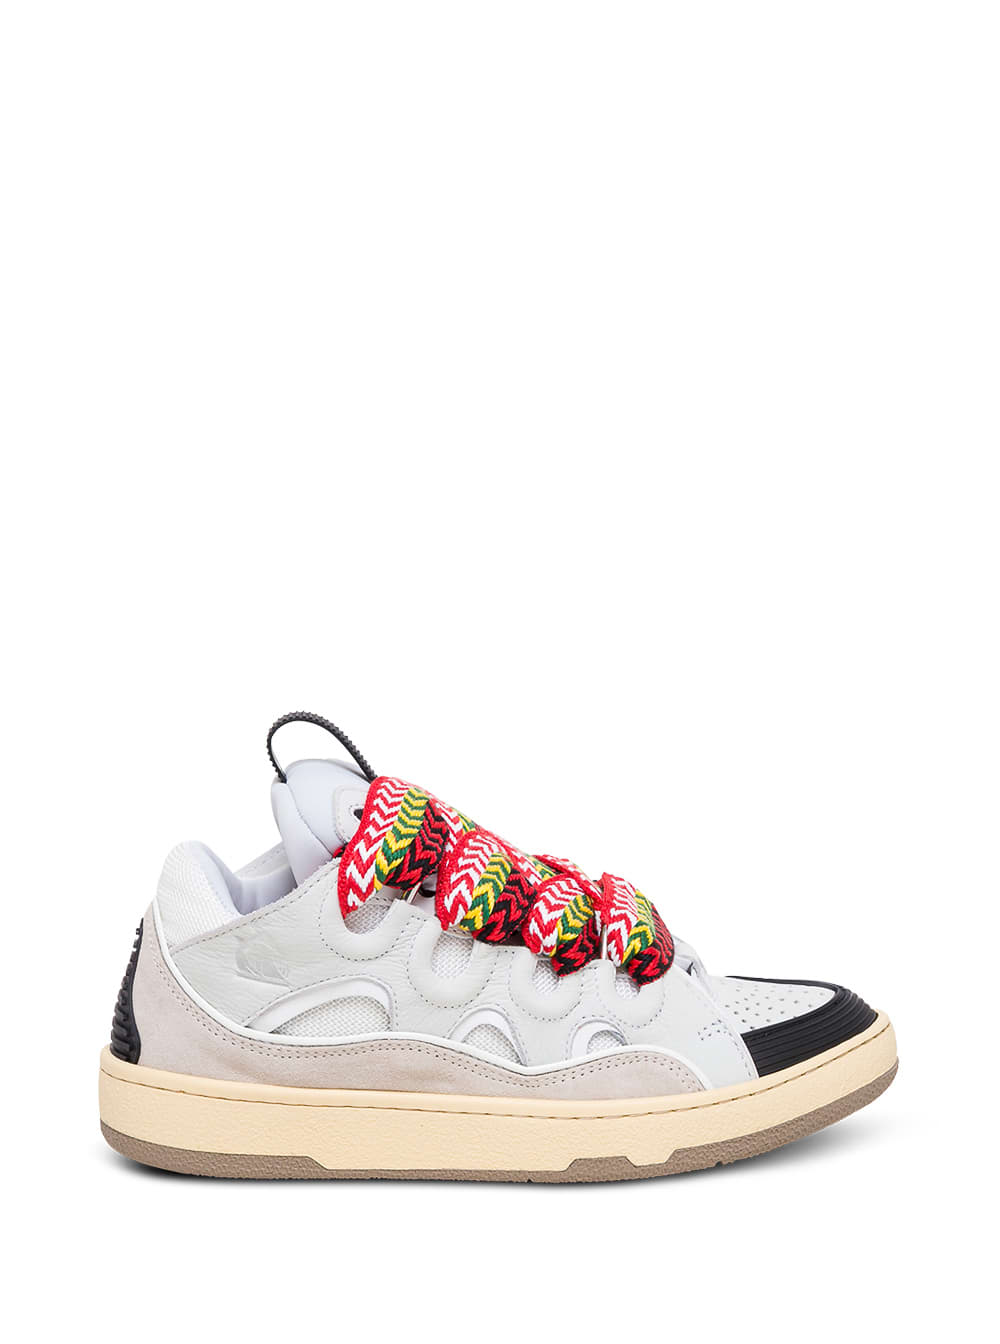 Lanvin Skate Leather Sneakers With Multicolor Laces